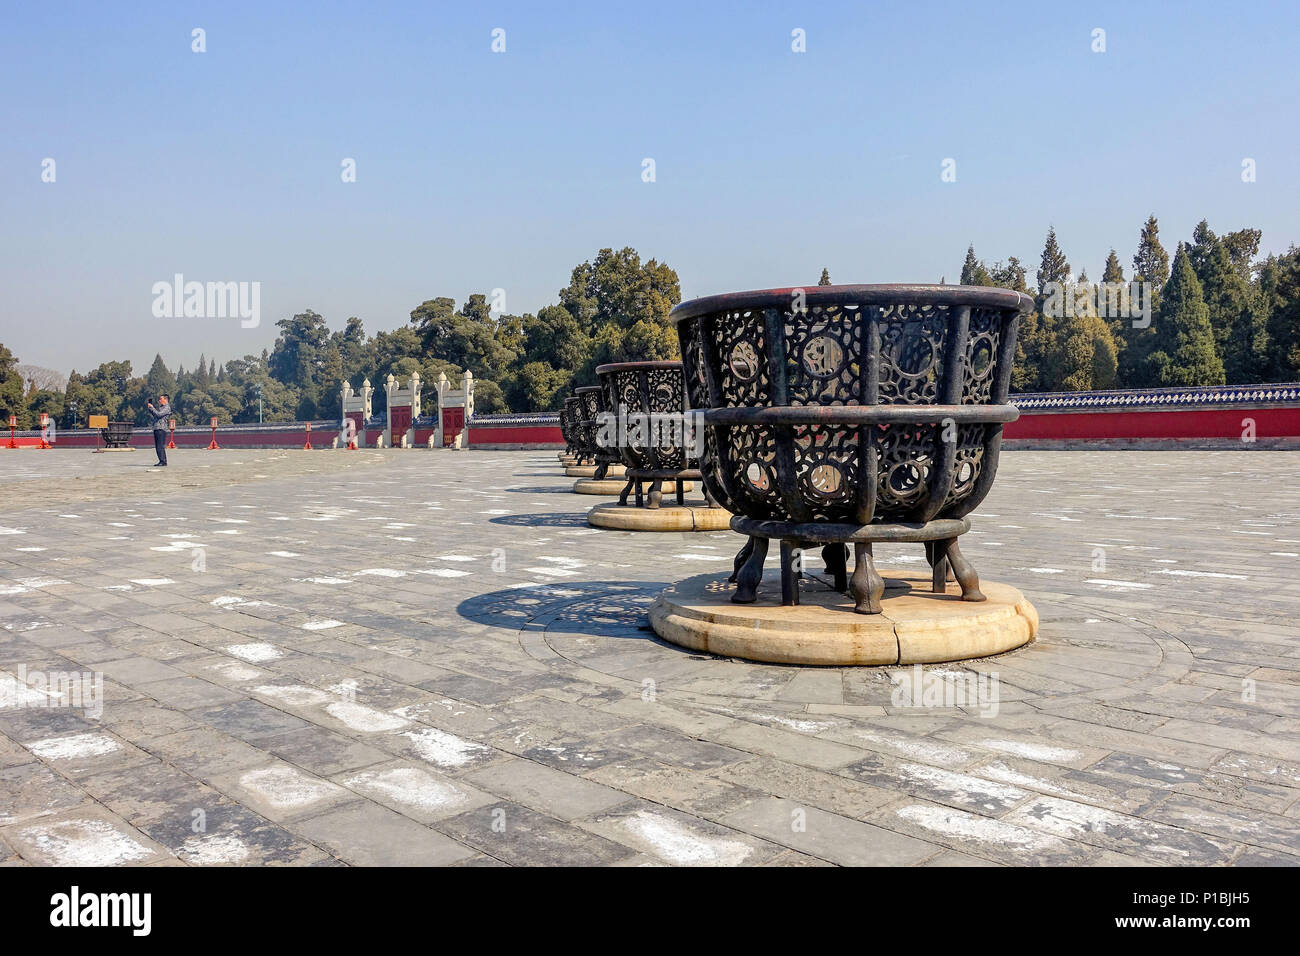 BEIJING, CHINA - MARCH 14, 2016: Tourists visiting The Circular Mound Altar at the Temple of Heaven complex. Stock Photo